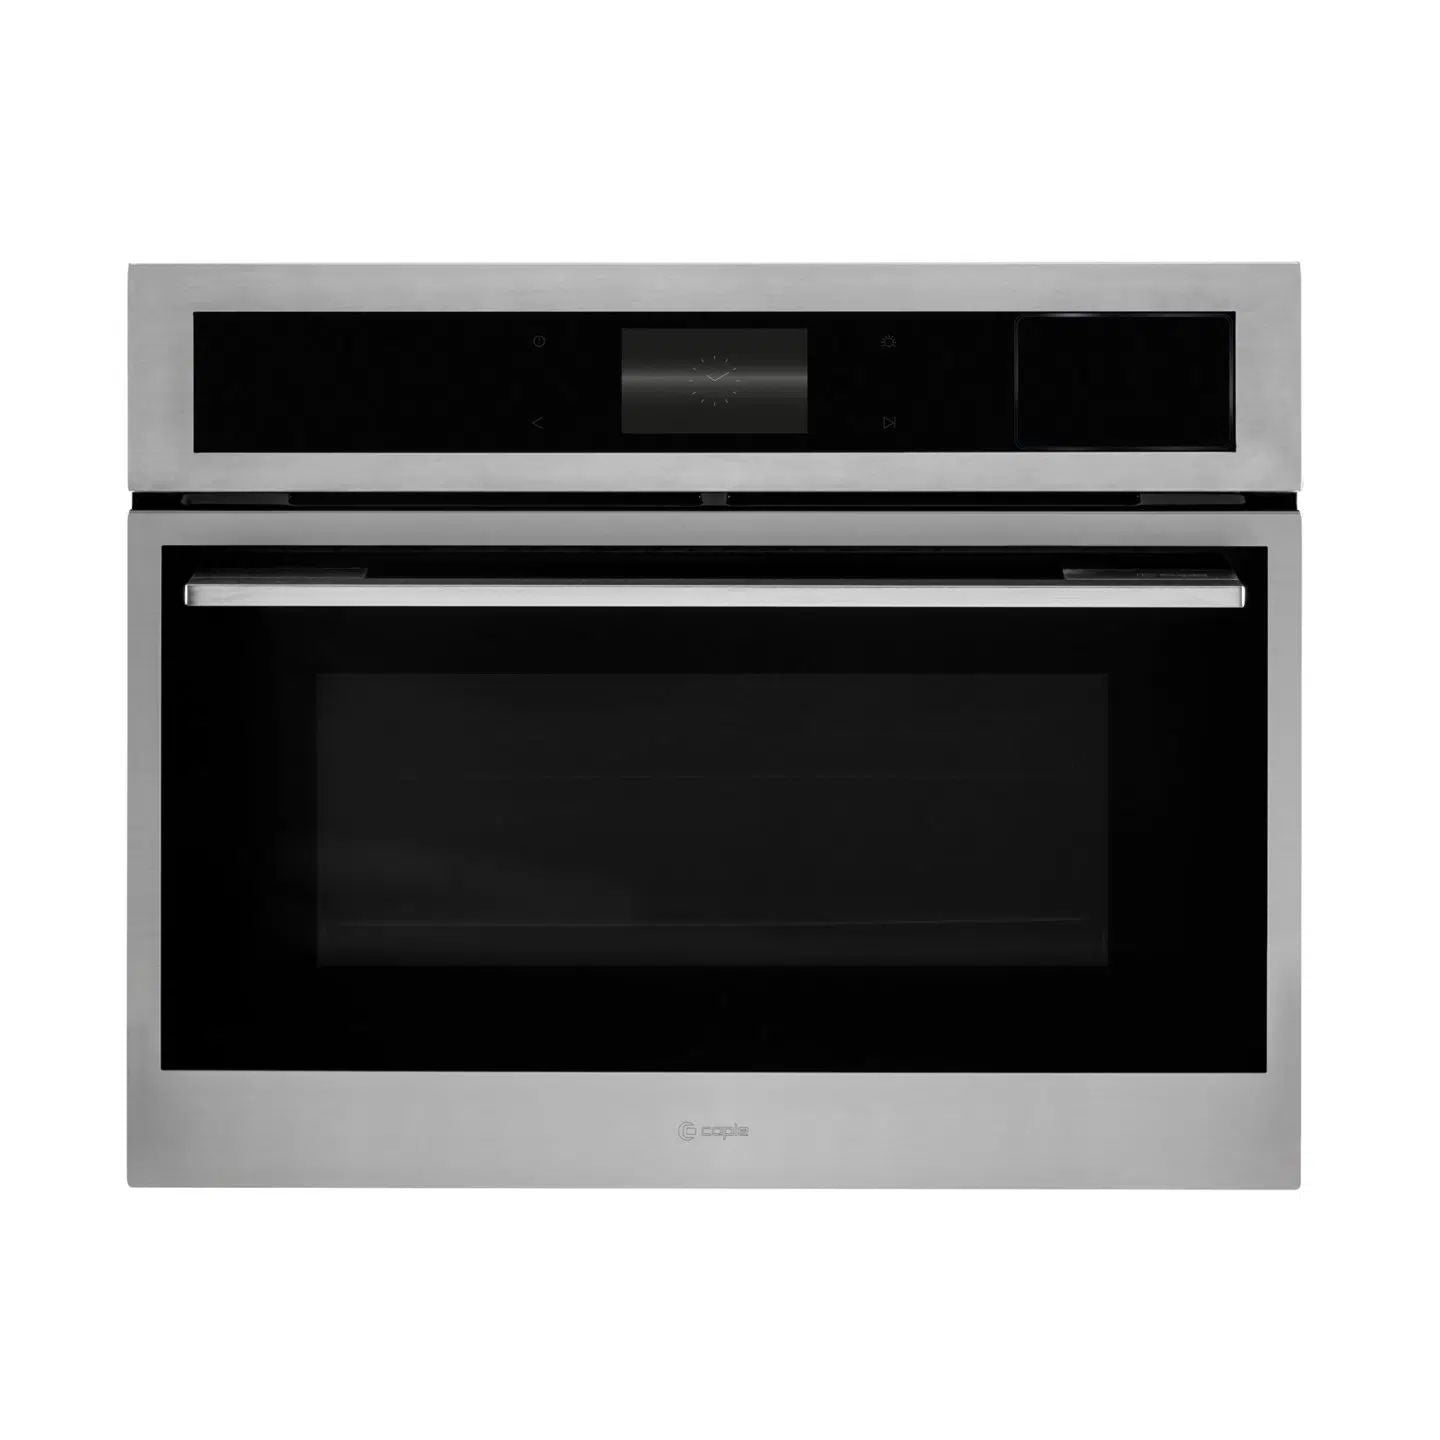 Caple CMS260SS Stainles Steel Built In Combi Microwave with Fan Oven, Grill & Steam